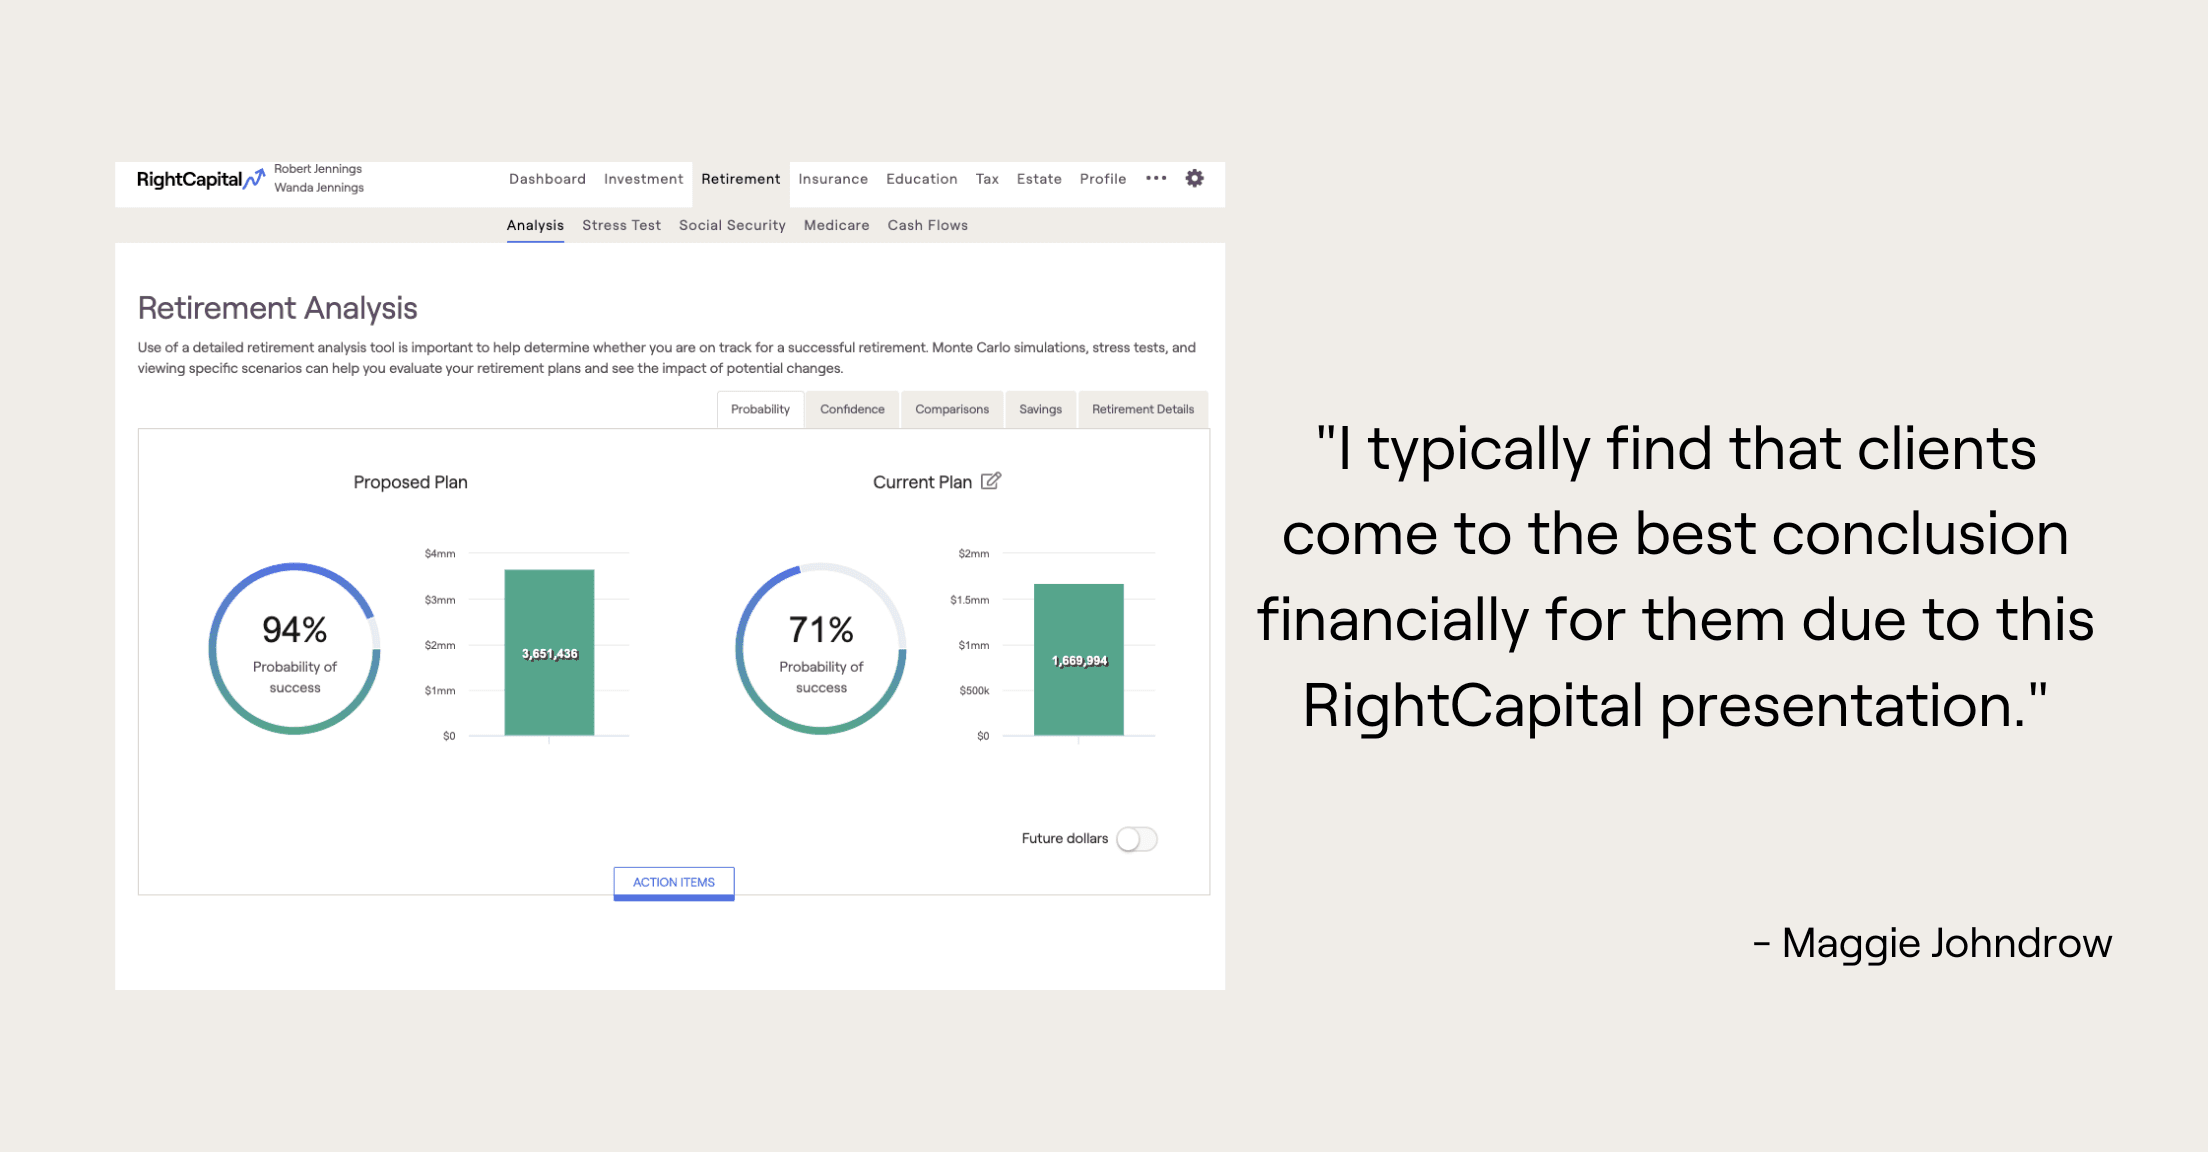 RightCapital screenshot of retirement analysis with Maggie Johndrow quote, "I typically find that clients come to the best conclusion financially for them due to this RightCapital presentation."